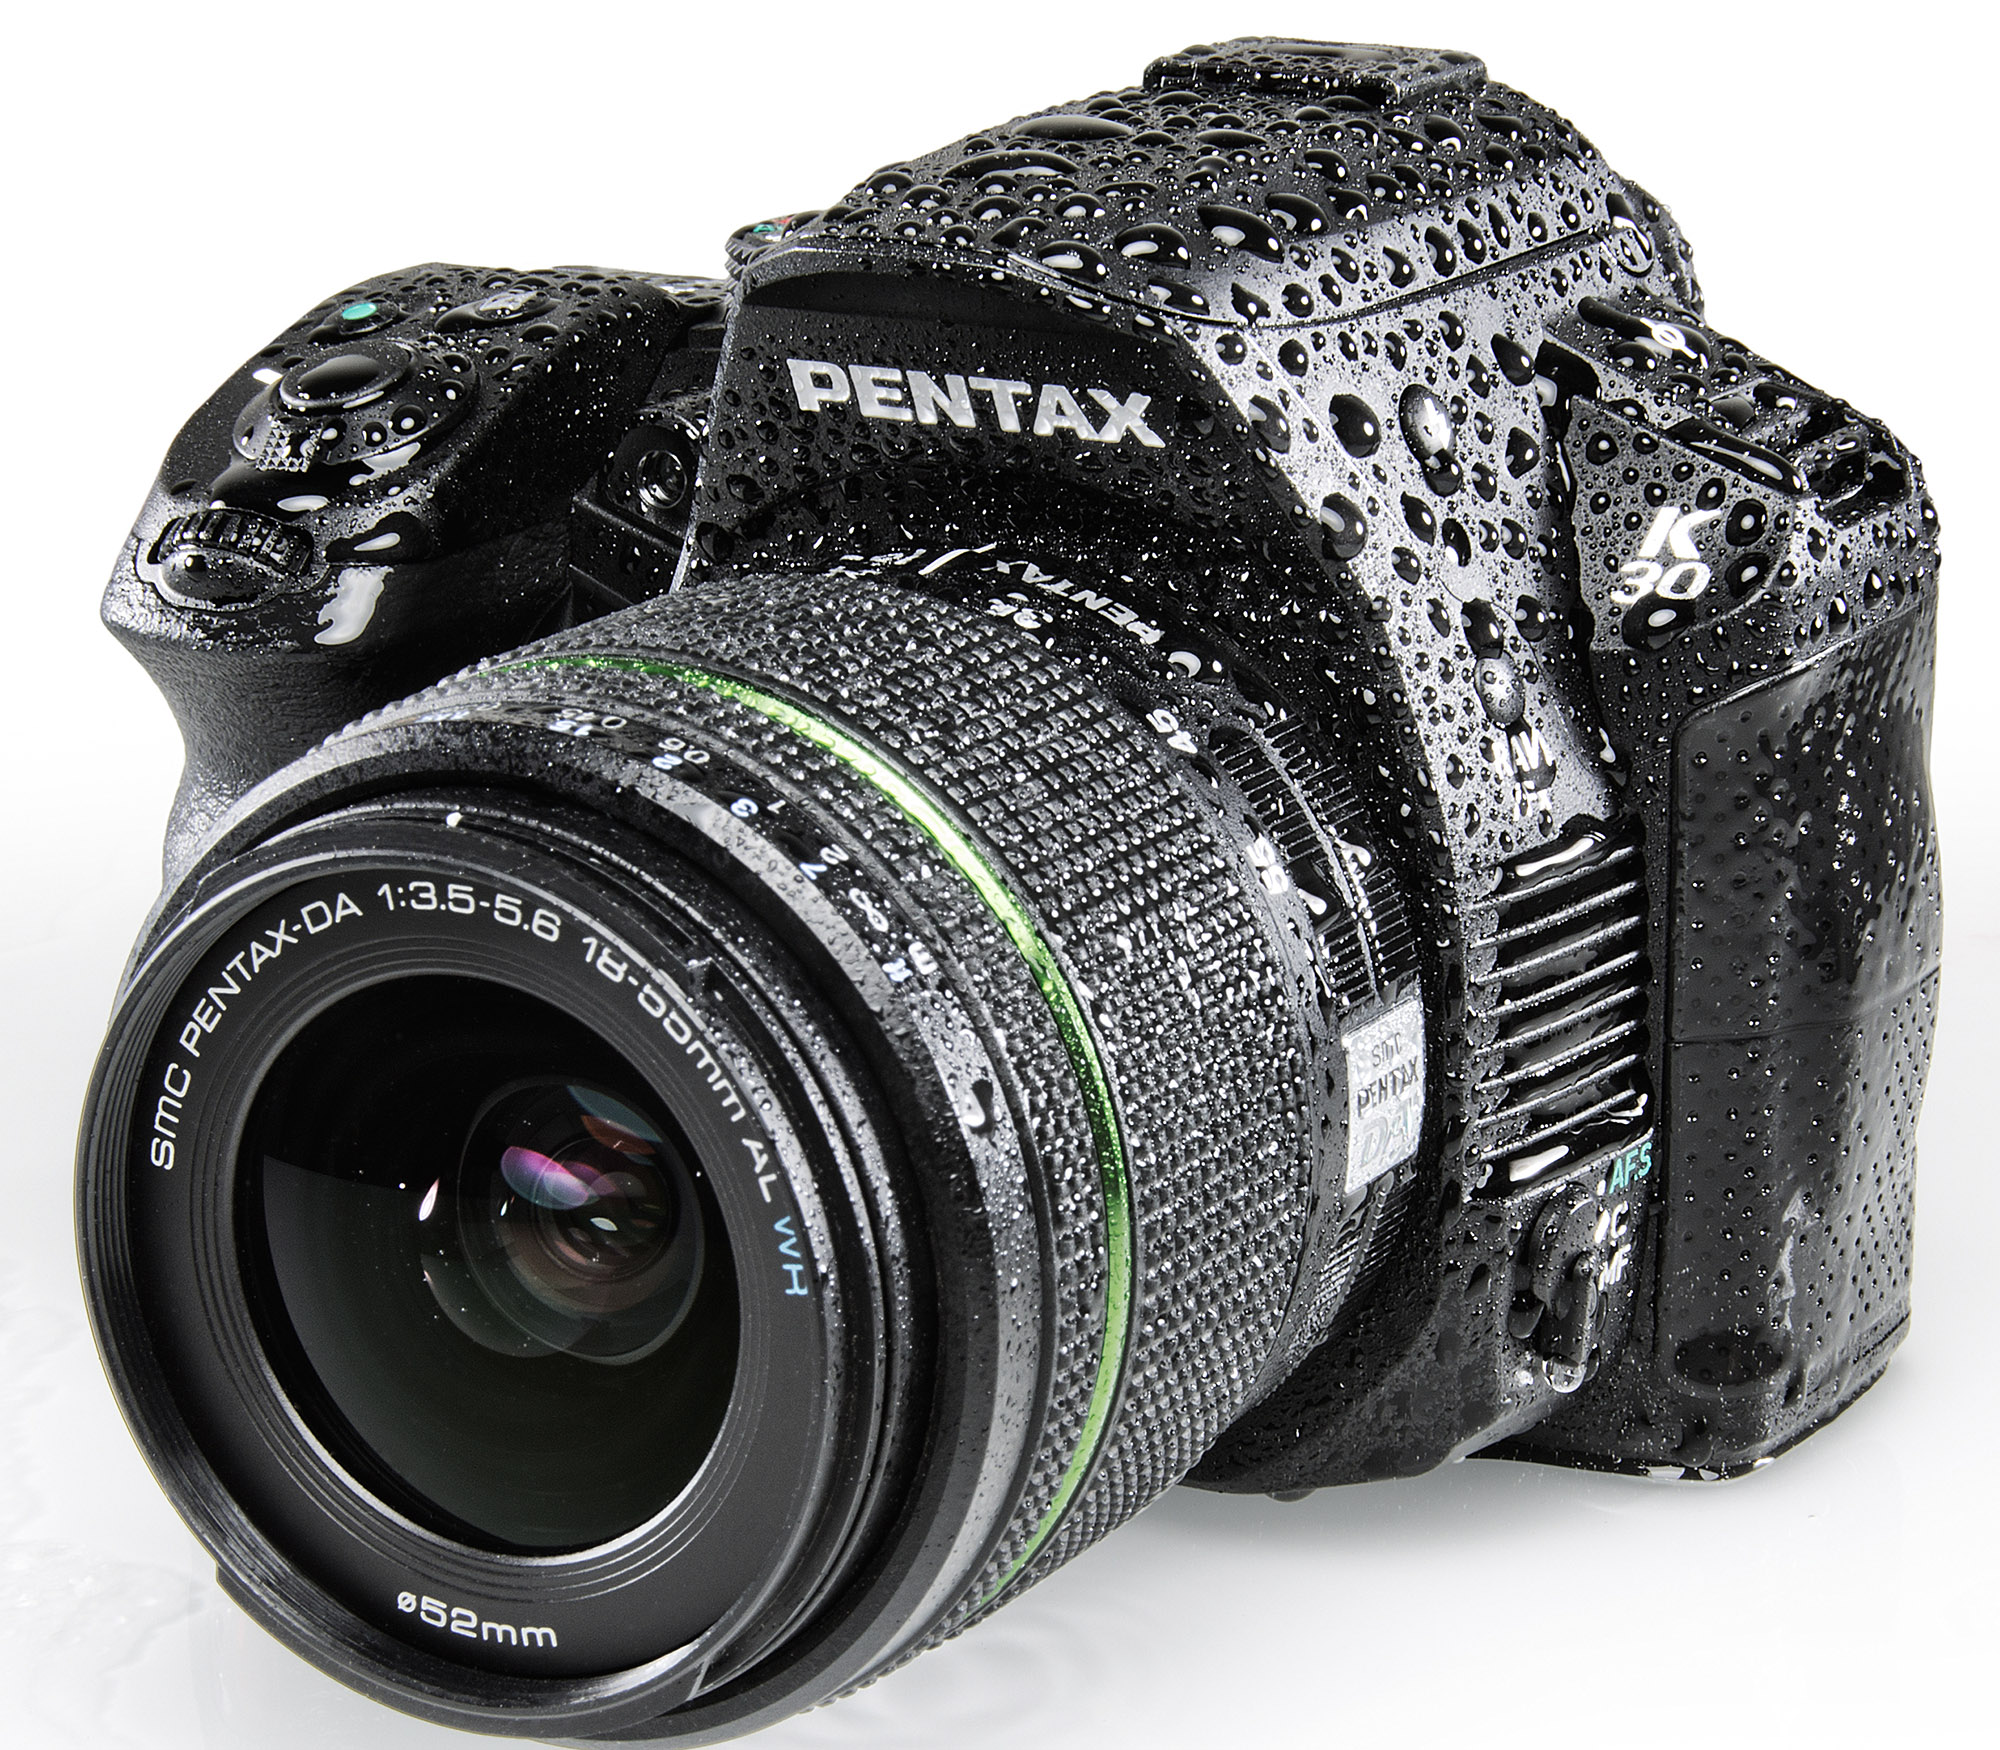 Cheap Photo: Pentax Weather Resistant Bodies, Just In Time For Spring